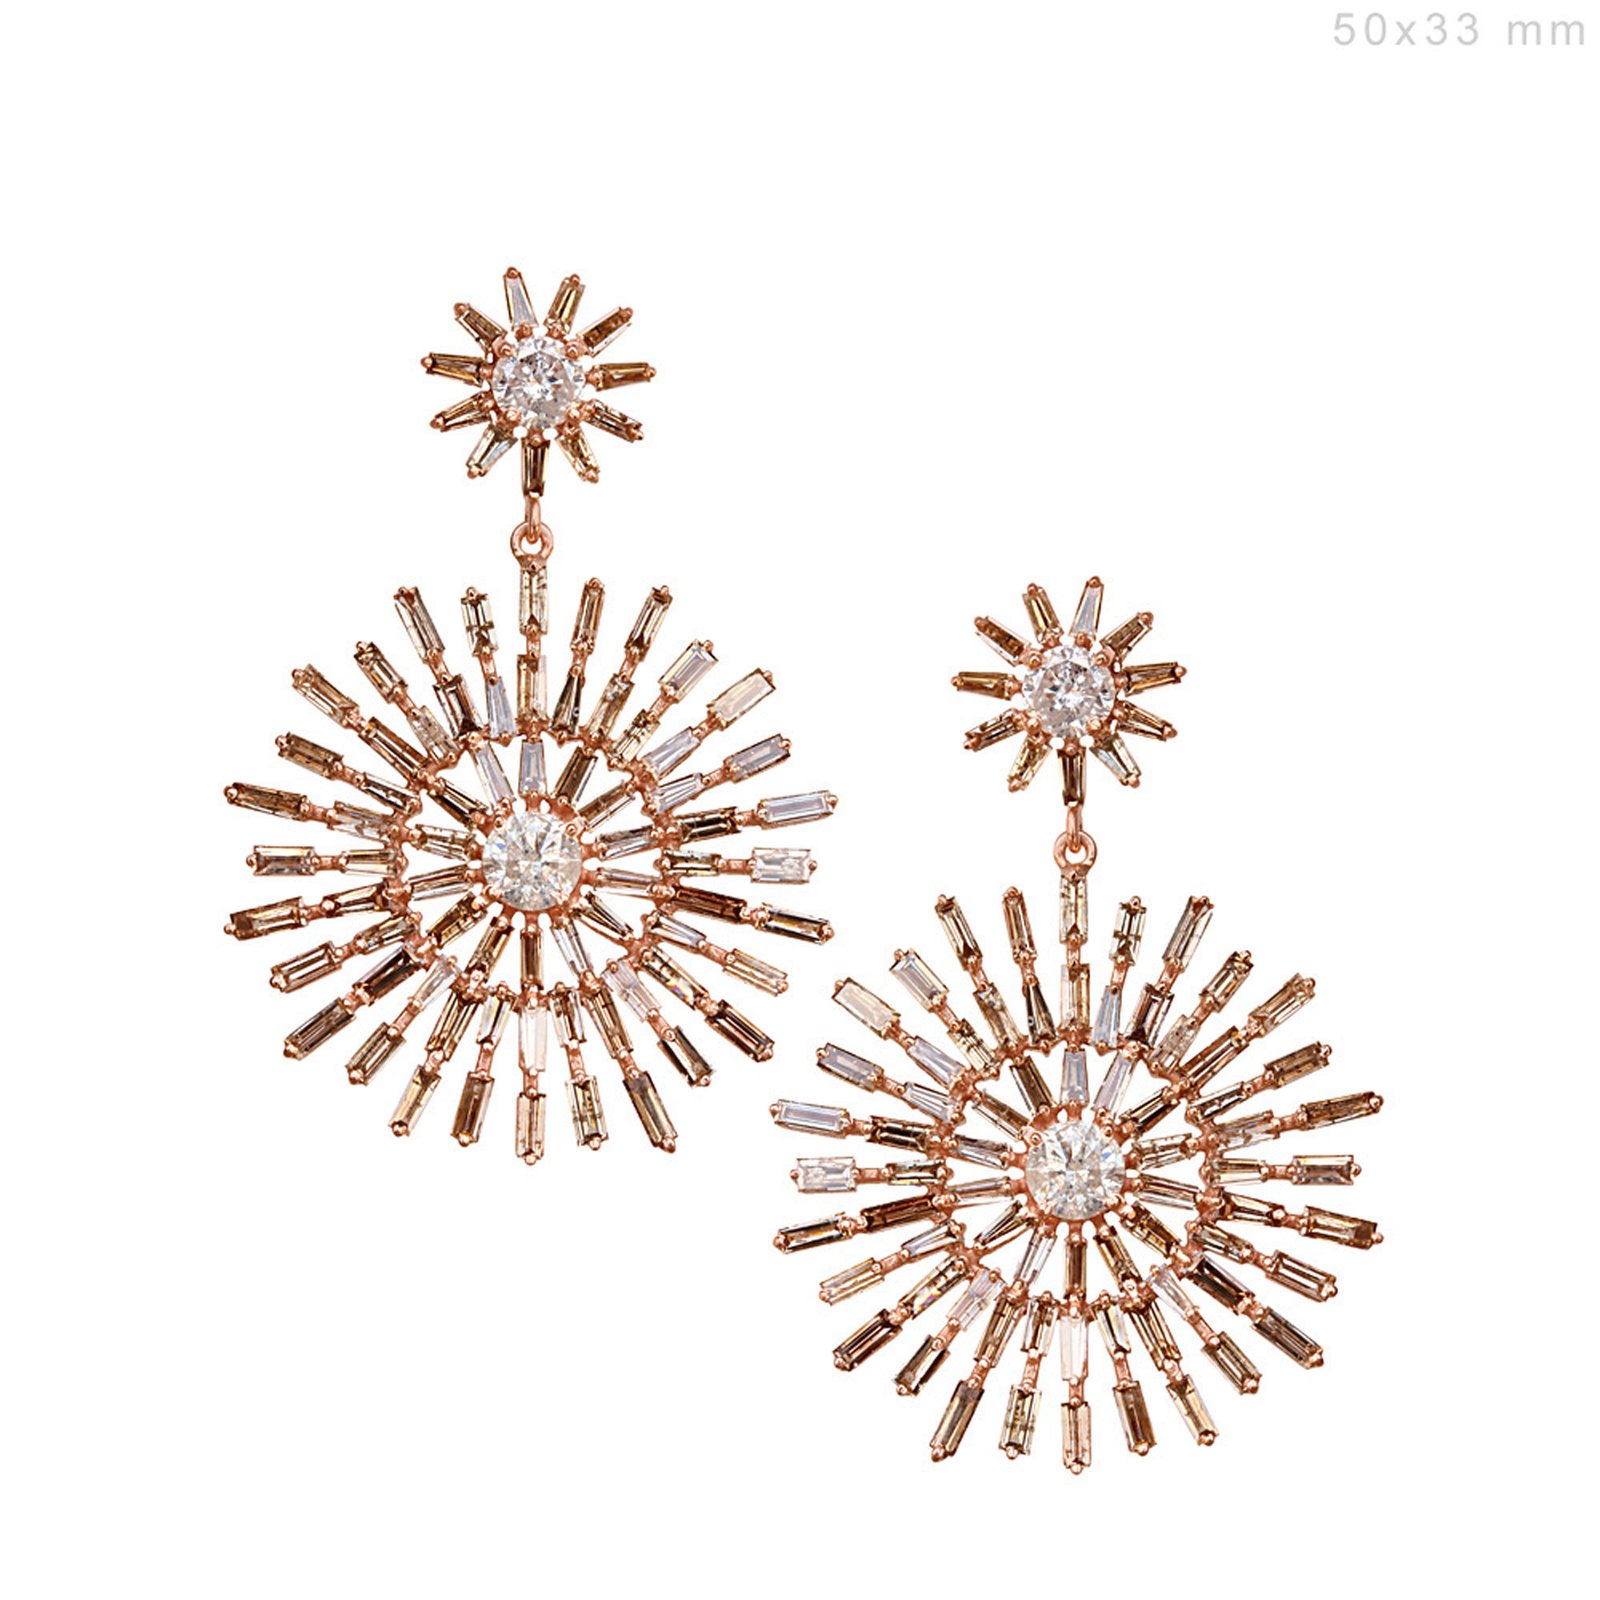 18k Solid gold floral dangle earrings with baguette diamond